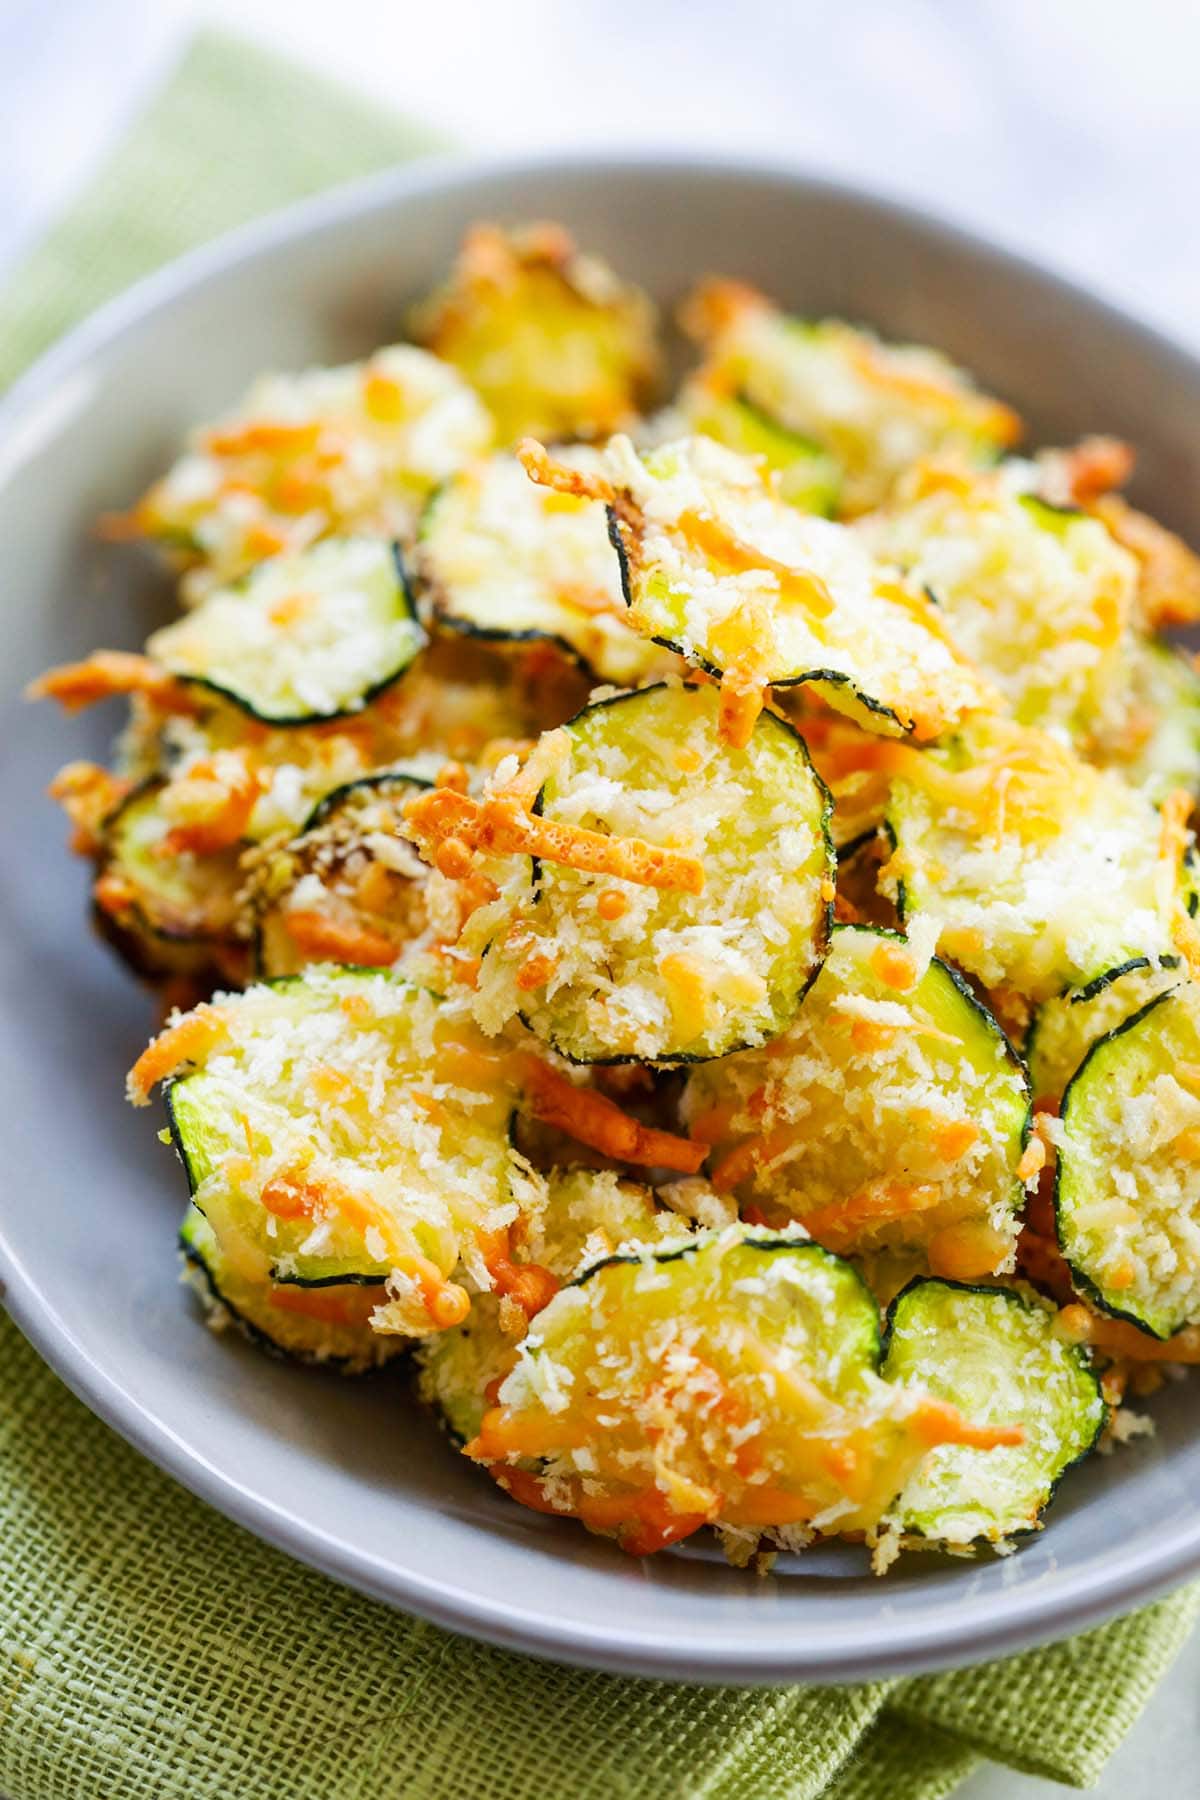 Golden-brown zucchini chips topped with Parmesan ready to serve.